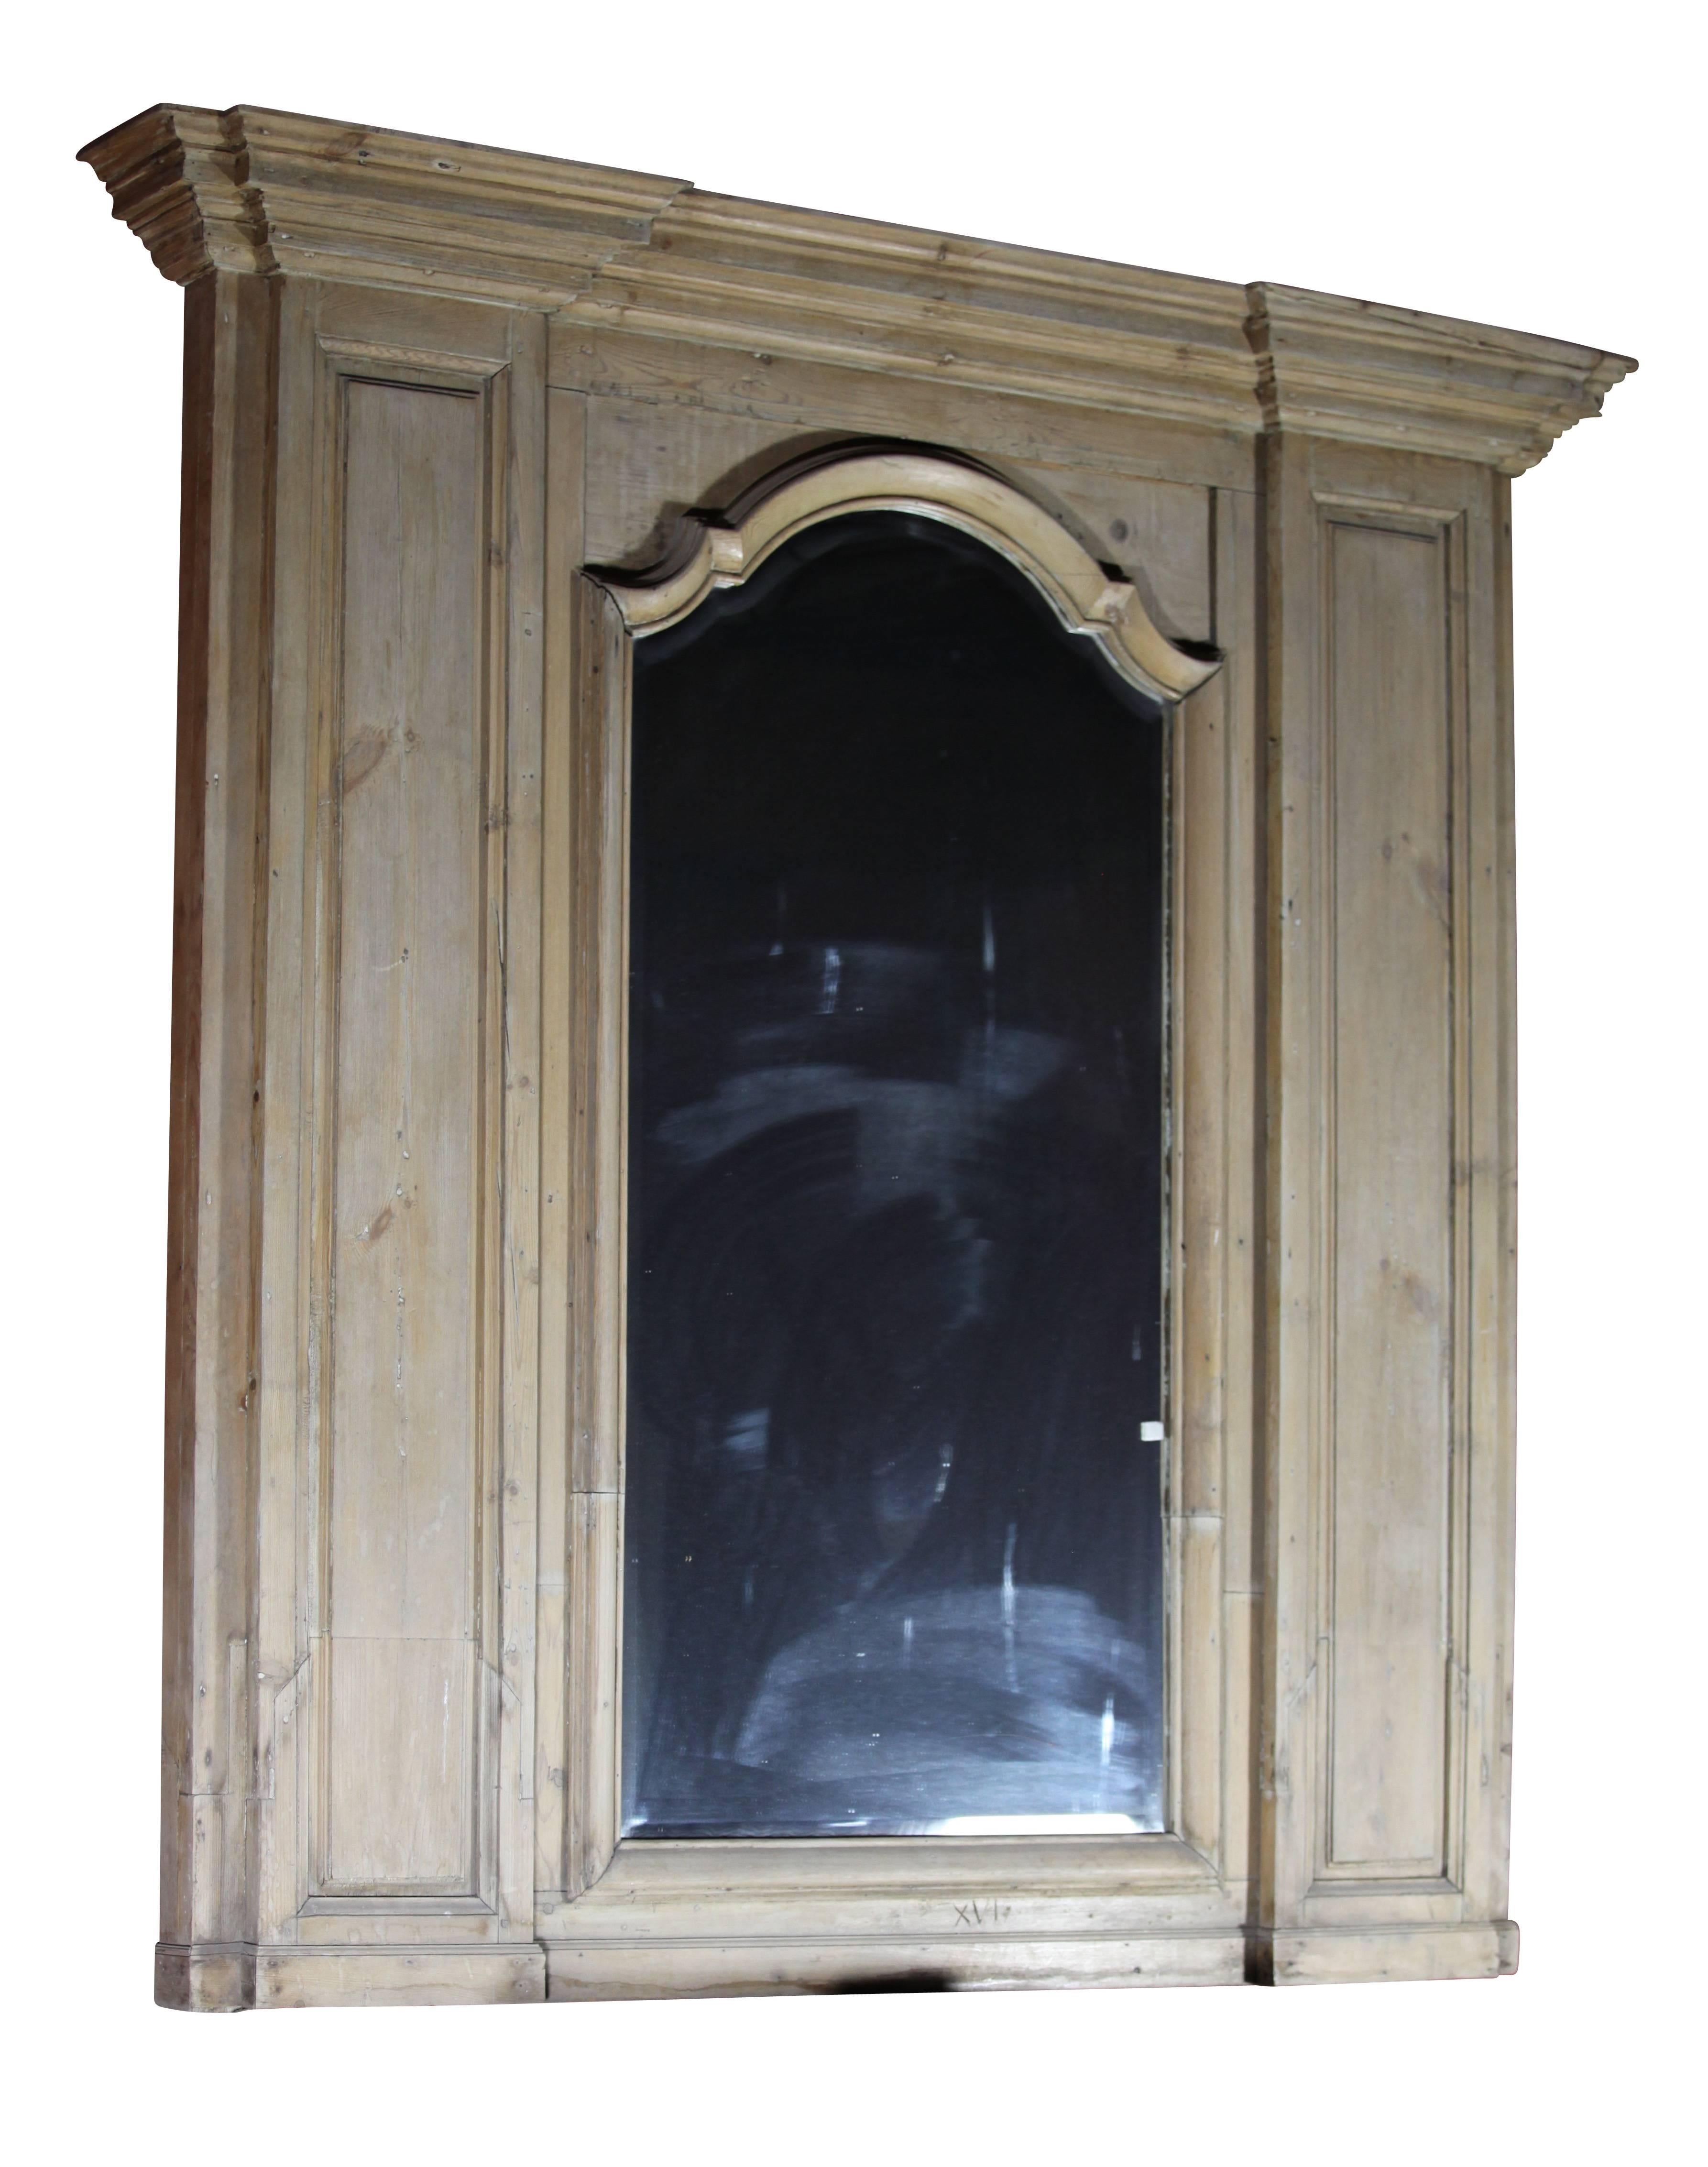 This original trumeau in pinewood comes out of a Louis XIV style paneled room and was installed above the fireplace surround.
The mirror is 20th century.
Measures:
167 cm EW 65,75".
192 cm EW+ 75,59"".
185 cm EH 72,83".
   